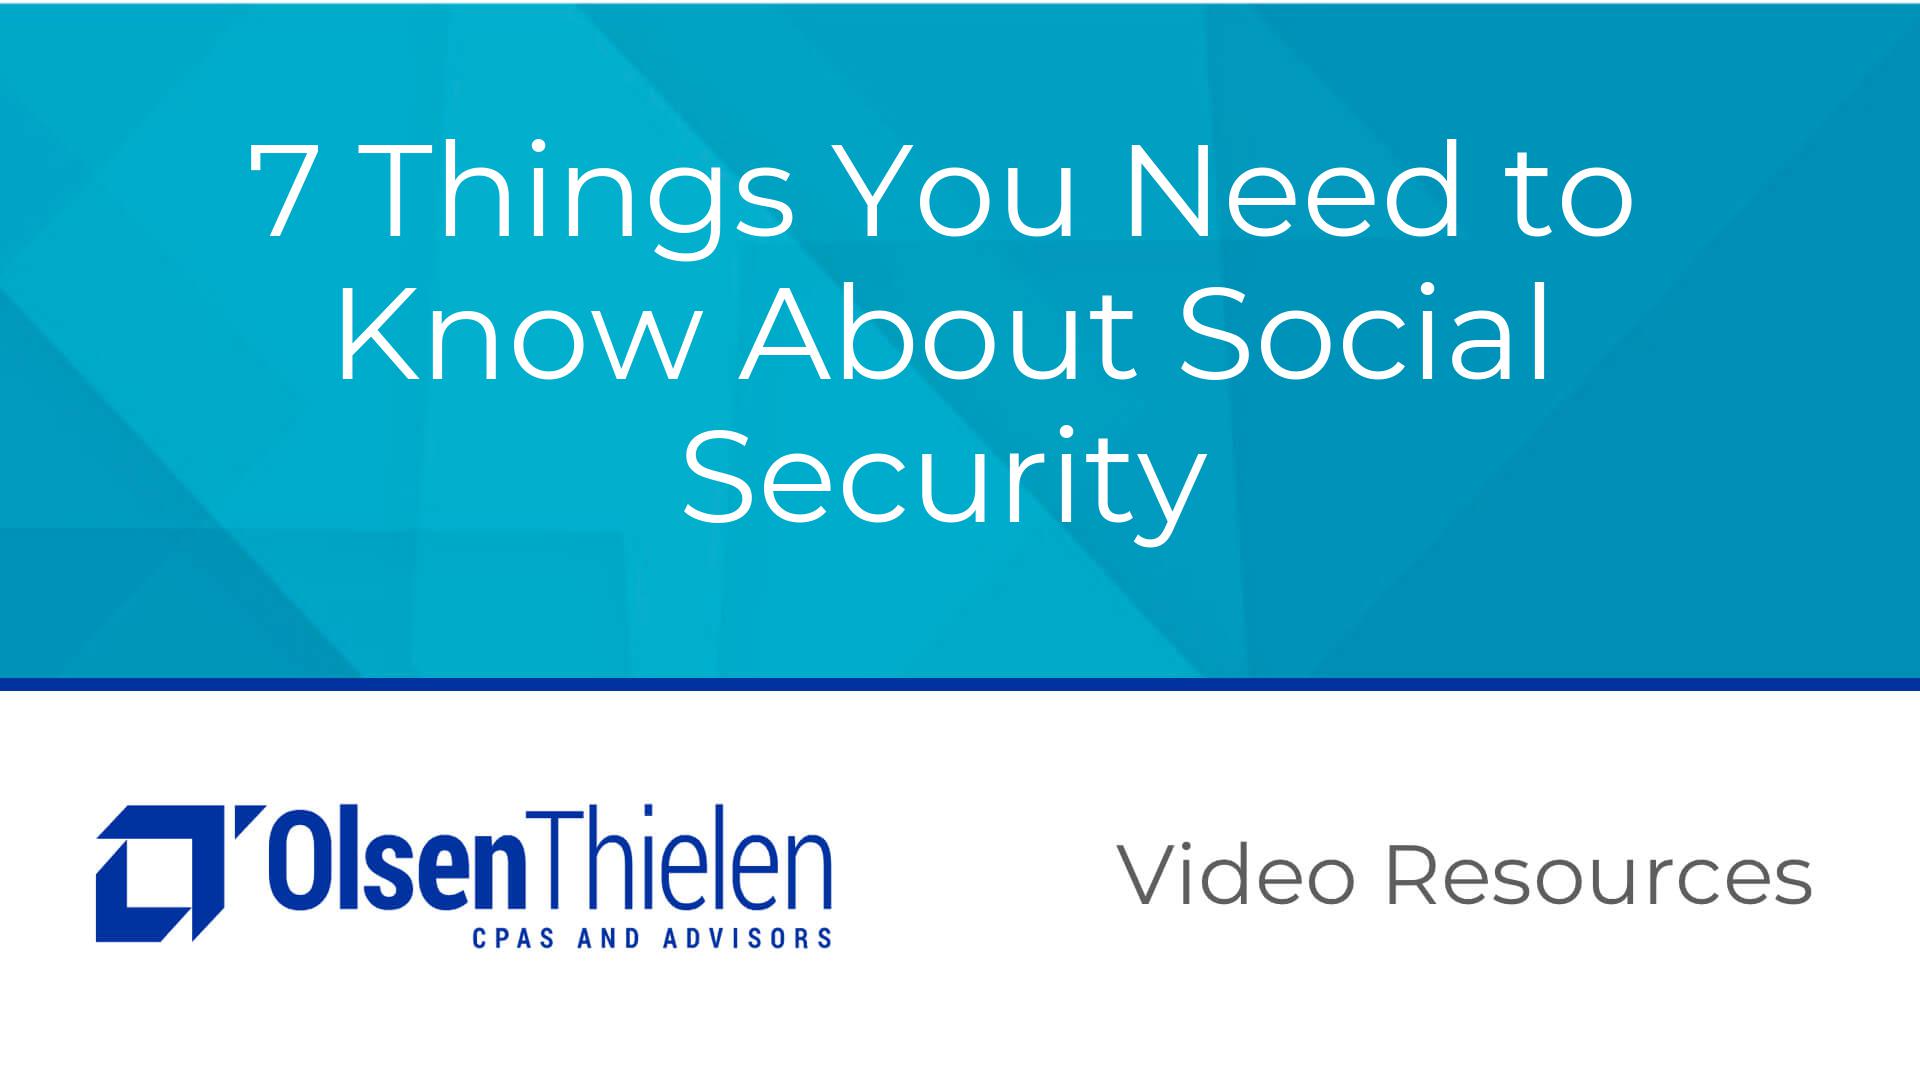 7 Things You Need to Know About Social Security